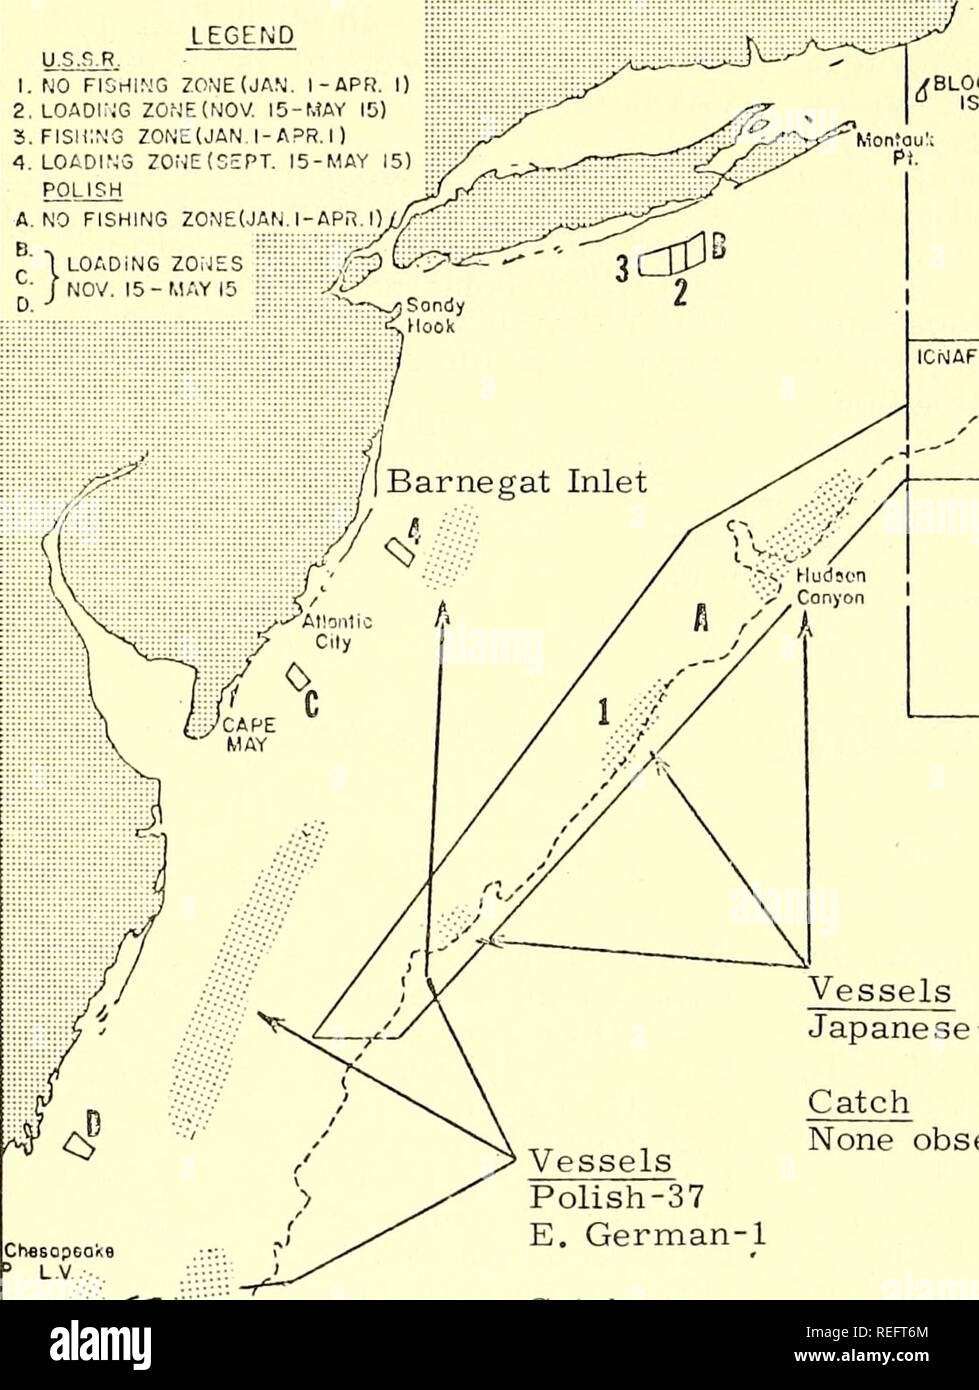 . Commercial fisheries review. Fisheries; Fish trade. FOREIGN FISHING OFF U.S. IN FEBRUARY 1970 U.S.-USSR U.S.&quot; POLISH MIDDLE ATLANTIC AGREEMENT AREAS LEGEND 1. NO FIGriING ZOME(JAN. I-APR. I) 2. LOADi:jG ZOfJE(NOV. l5-f,iAV b) S.FISIIINS ZONE(JAN,l-APR.I) 4. LOADING ZOME(SEPT. 15-MAY 15) POLISH A. NO FISHING ZONECJAfj I-;. ^ NANTUCKET ;ILVER HAKE AREA BIOCK J, Canyon / Currituc Sound Nags Head Oregon Inlet J CAPE 2 HATTER AS/ Vessels Polish-37 E. German-1 Catch Herring Mackerel Vessels Soviet-104 Catch Herring Mackerel Japanese-8 Catch None observed Vessels Japanese-9 Spanish-1 Catch N Stock Photo